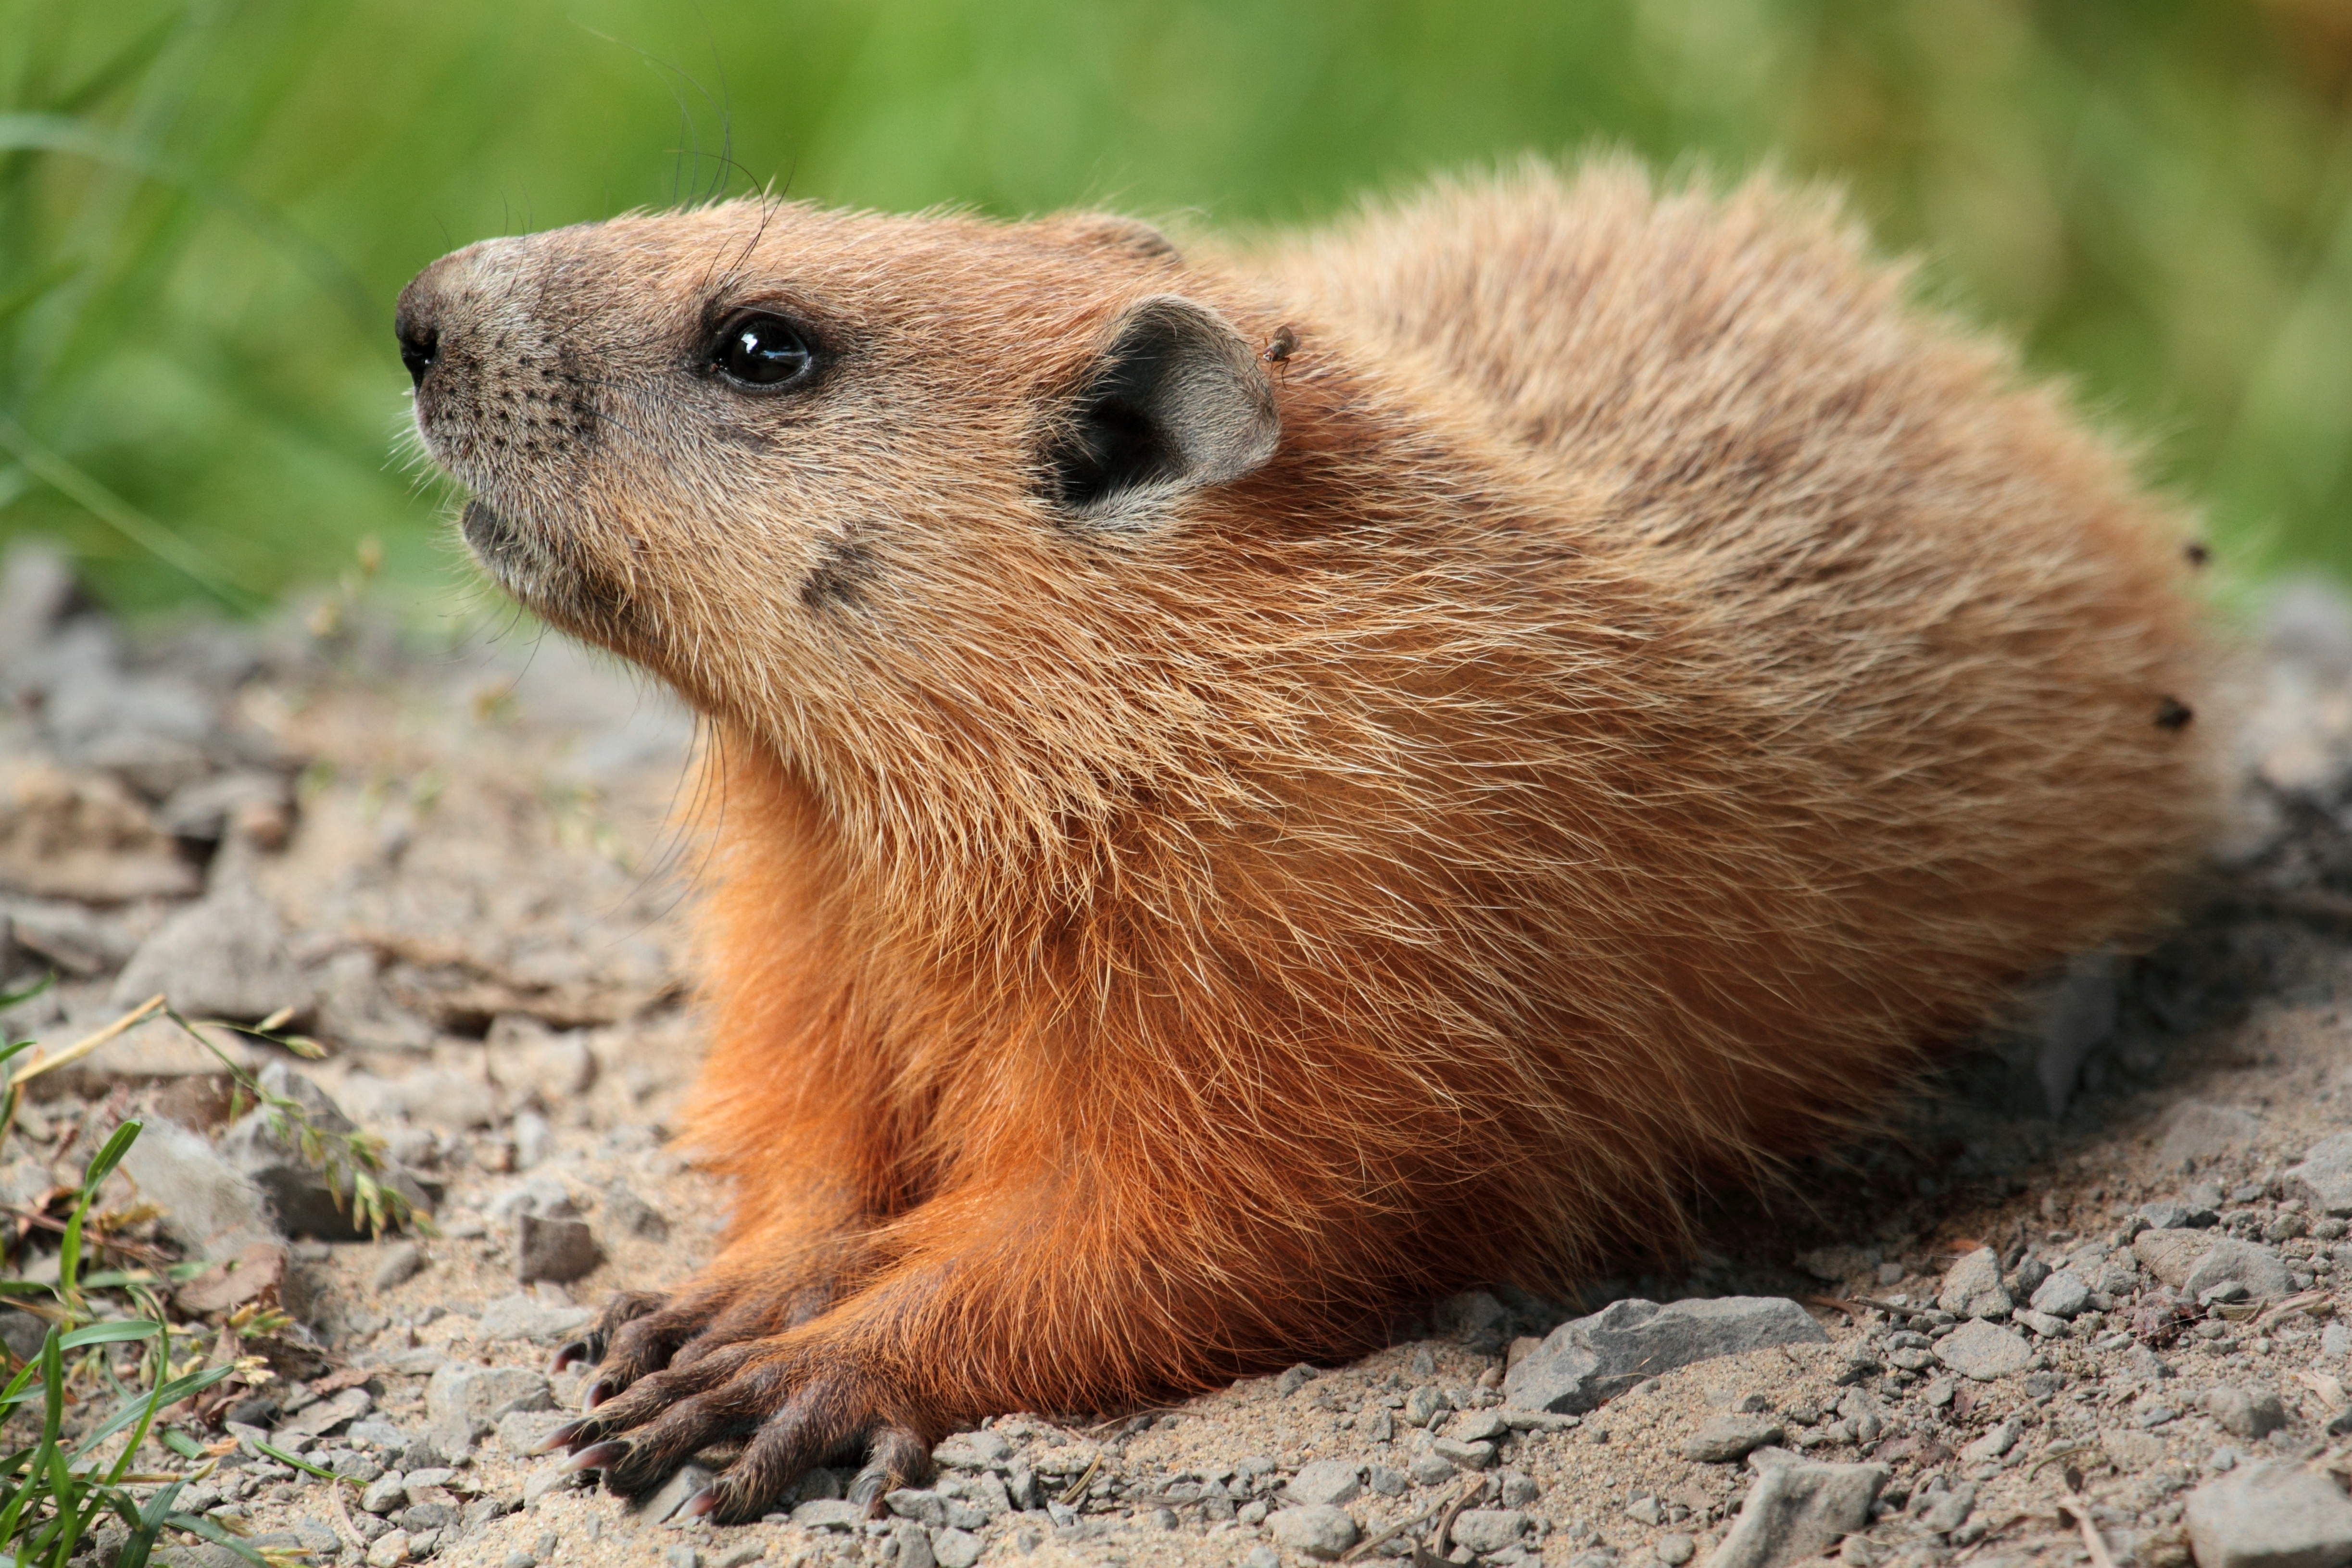 How Much Wood Could A Woodchuck Chuck If A Woodchuck Could Chuck Wood Lyrics